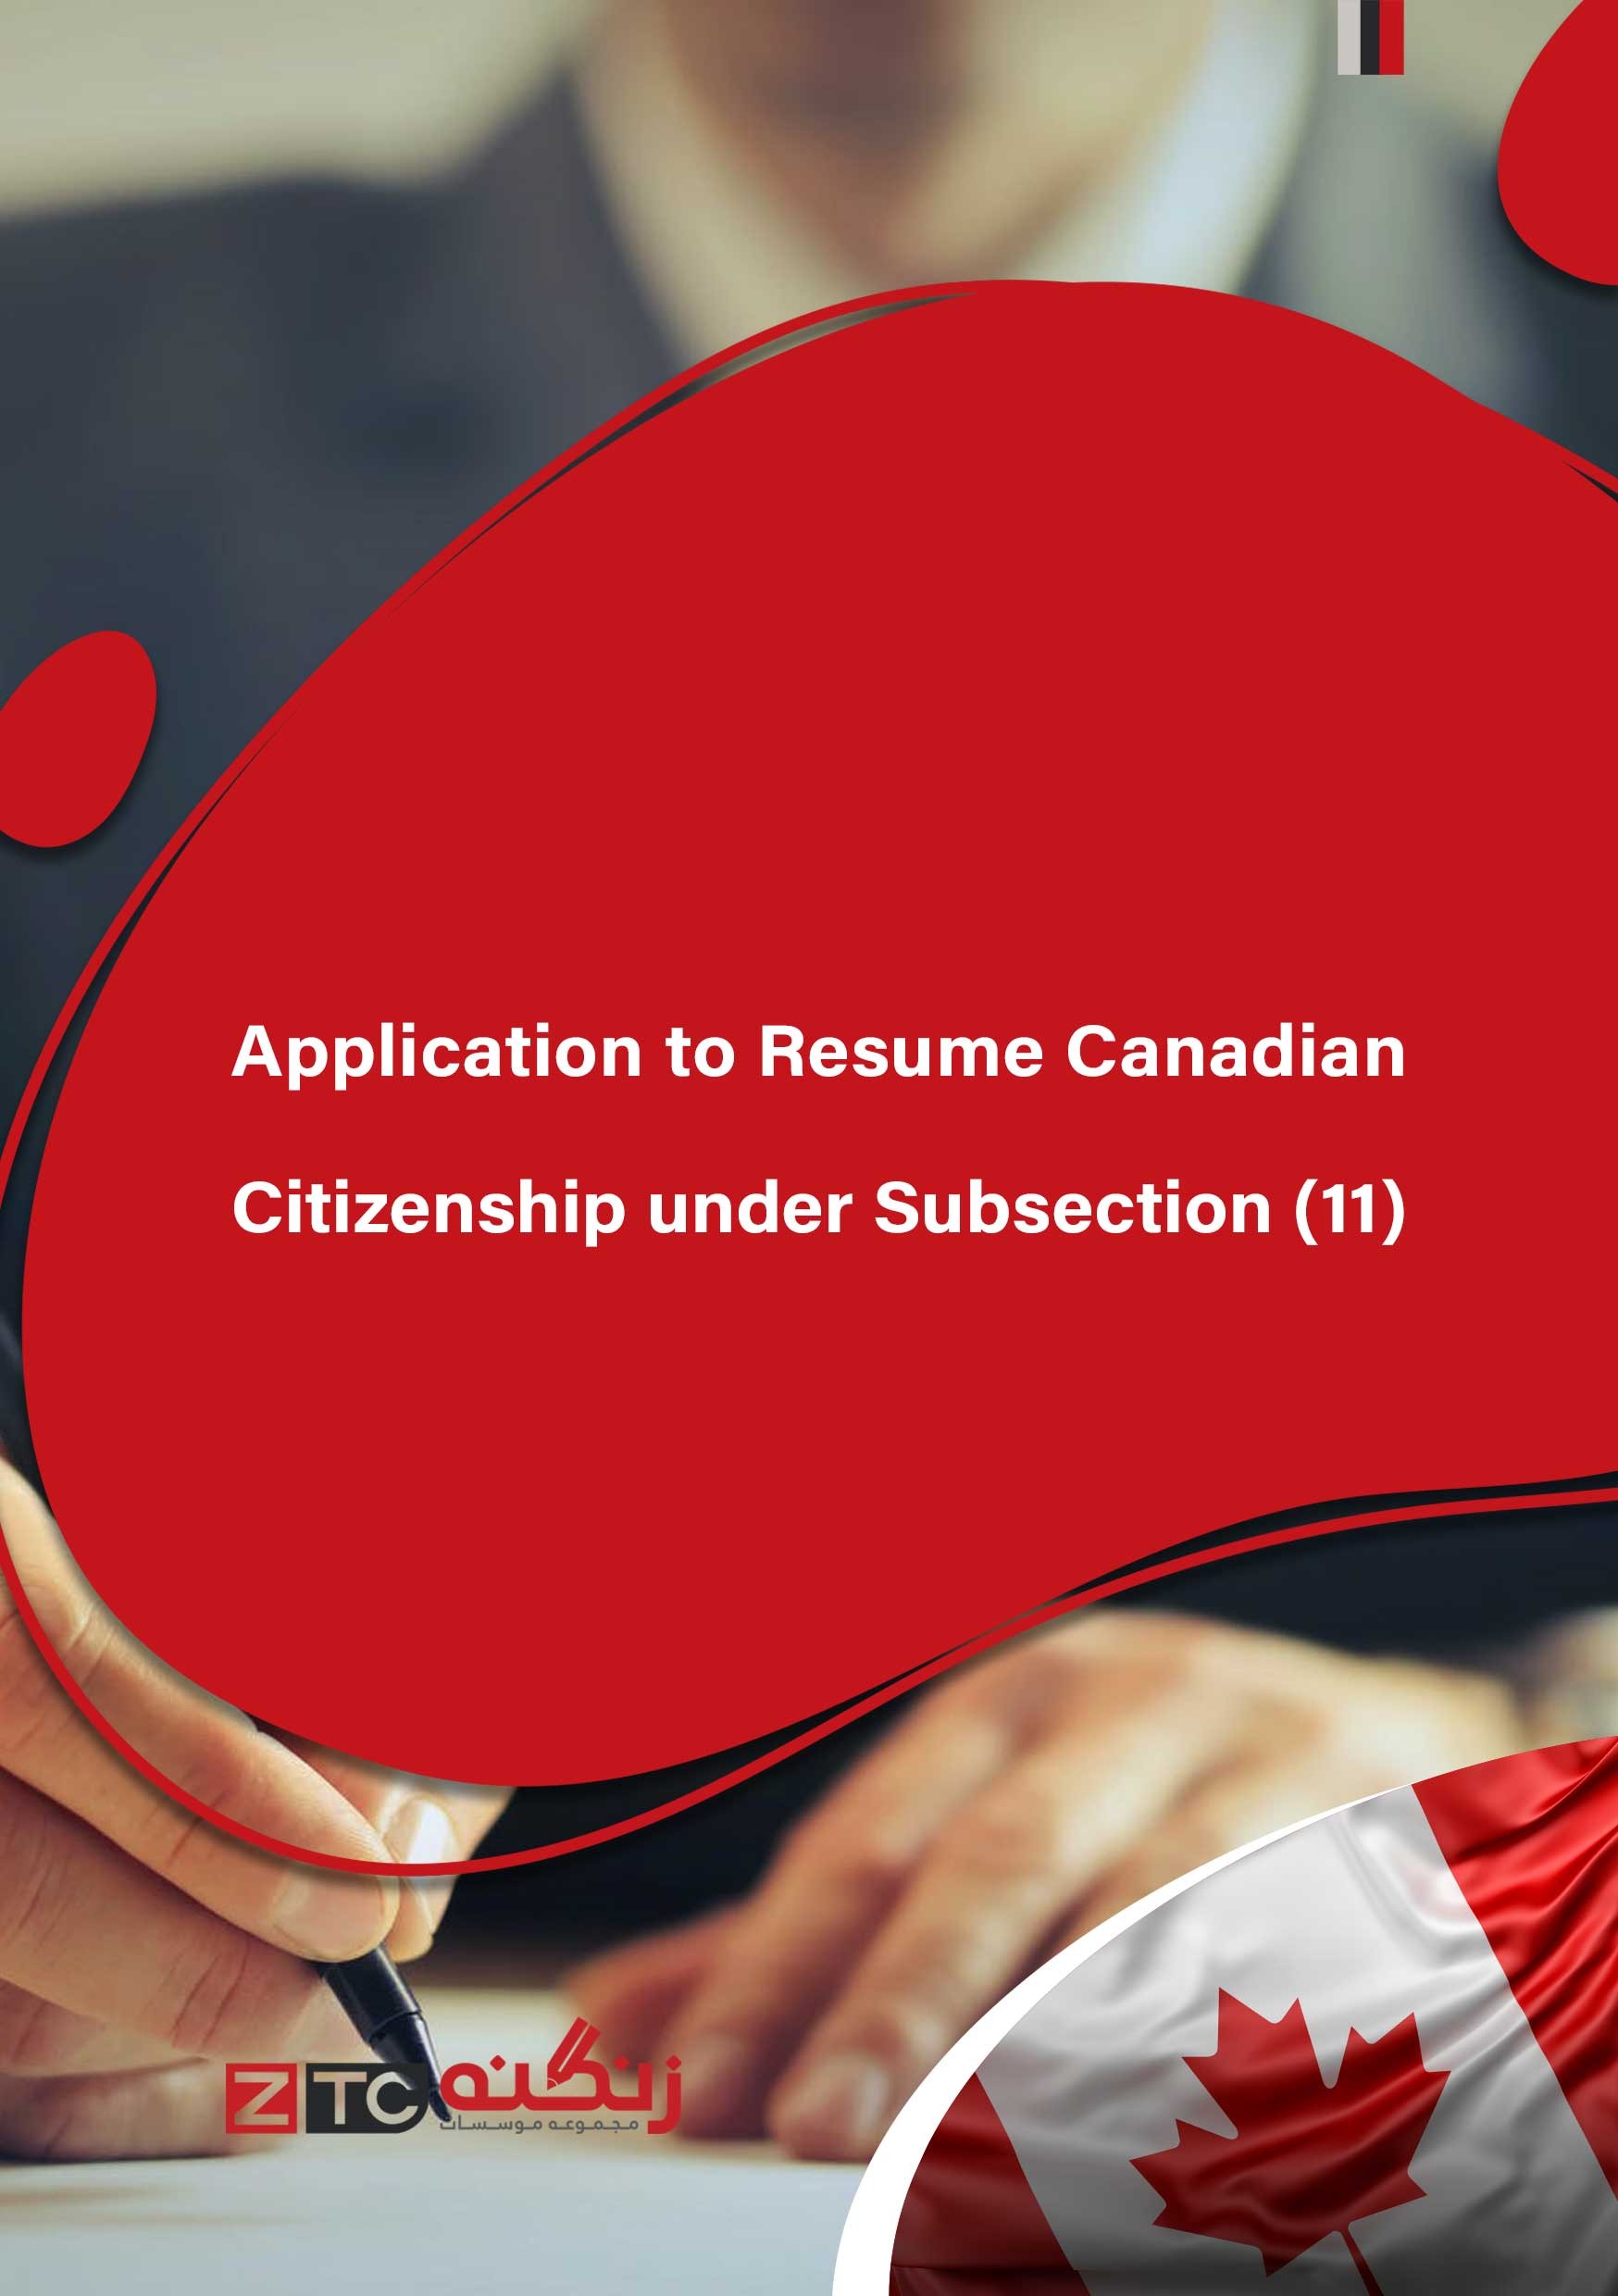 Application to Resume Canadian Citizenship under Subsection (11)